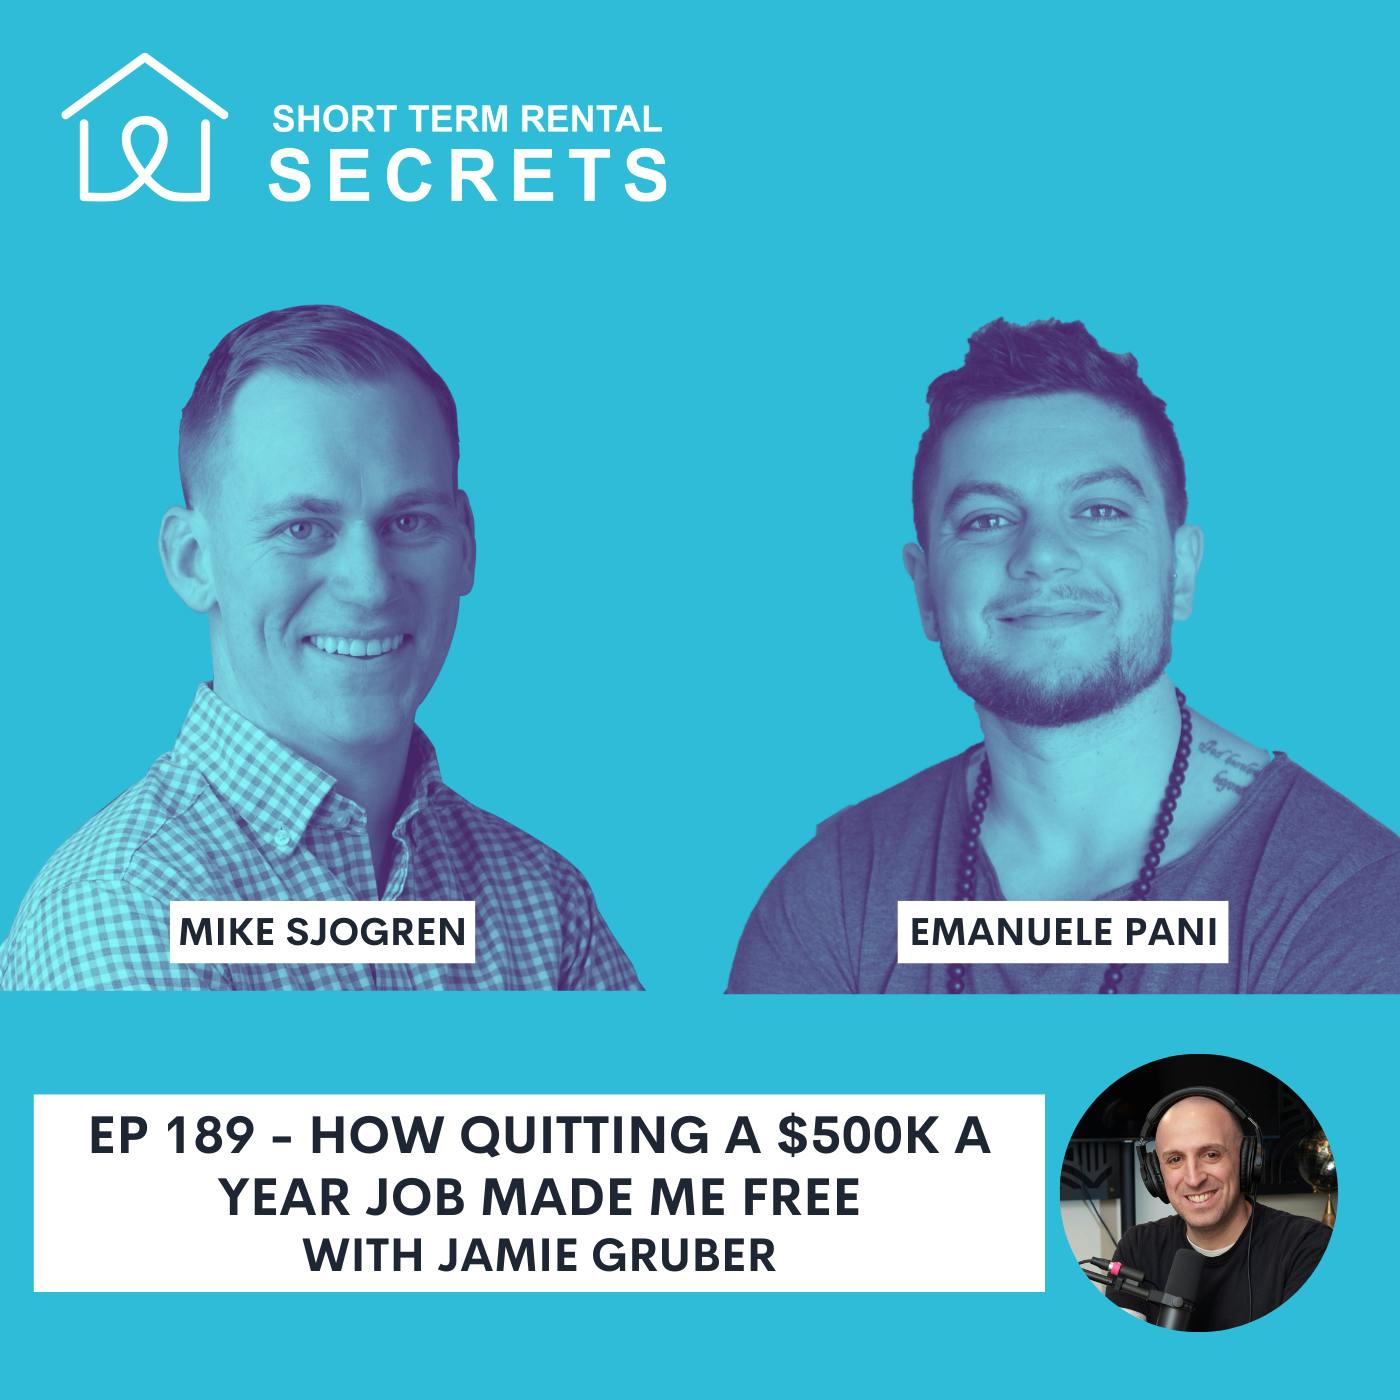 Ep 189 - How Quitting a $500K a Year Job Made Me Free with Jamie Gruber